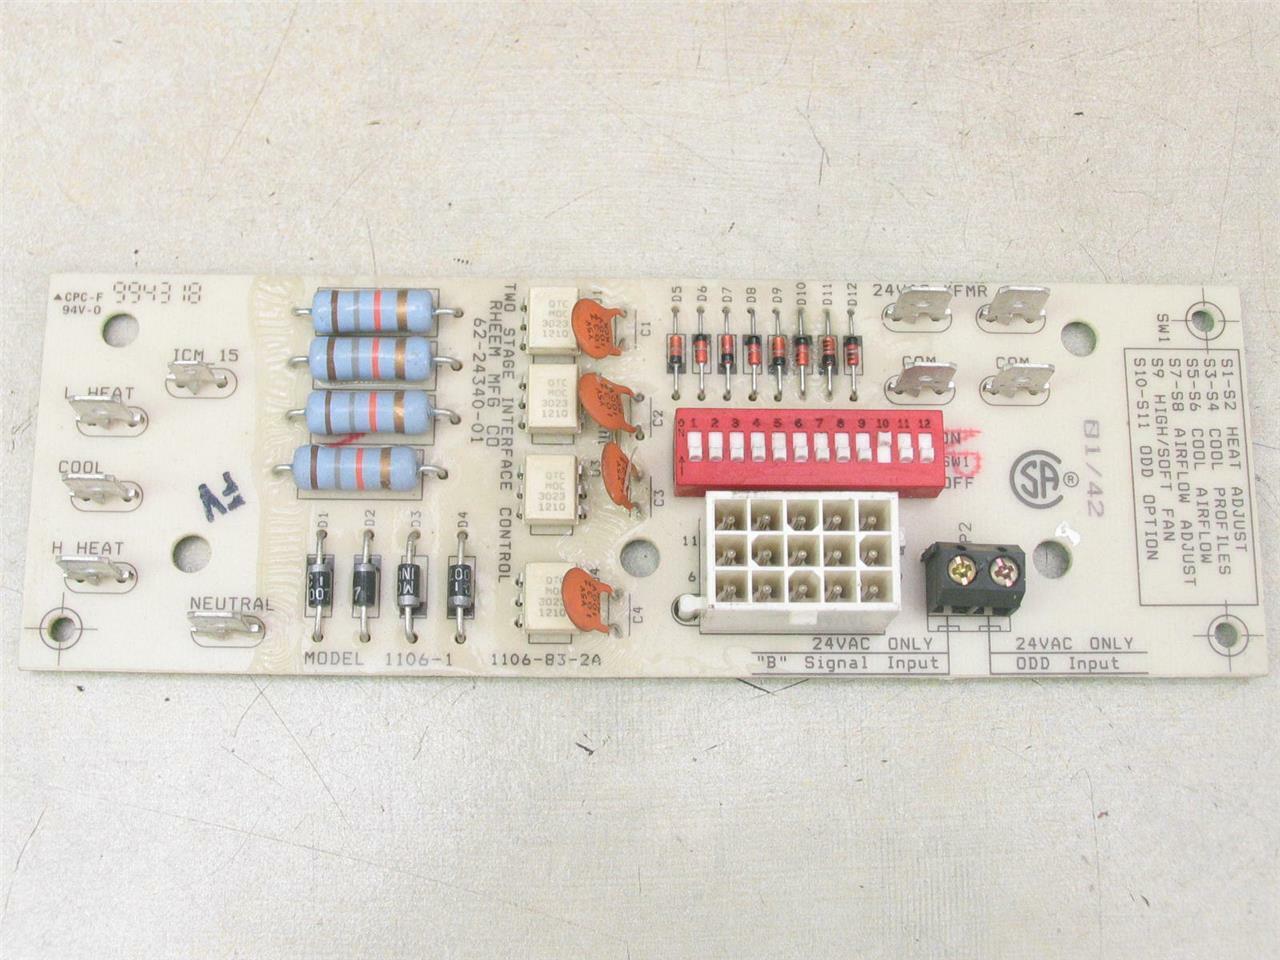 Rheem Ruud 62-24340-01 Two Stage Interface Circuit Board 1106-1 1106-83-2A